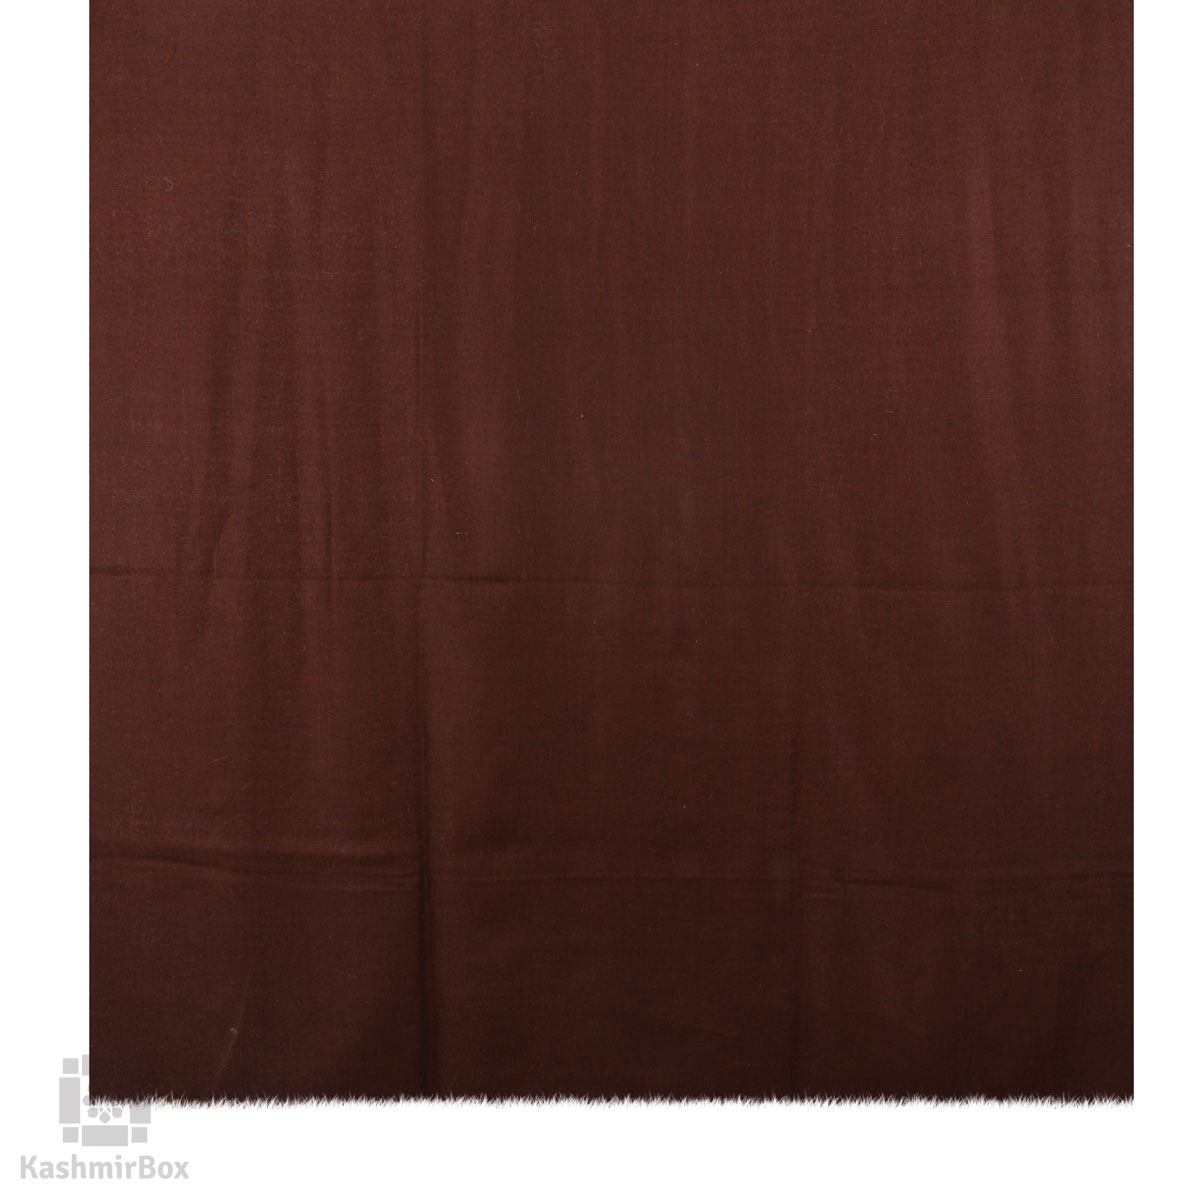 Hickory Brown Solid Styled Cashmere Pashmina Shawl - Kashmir Box